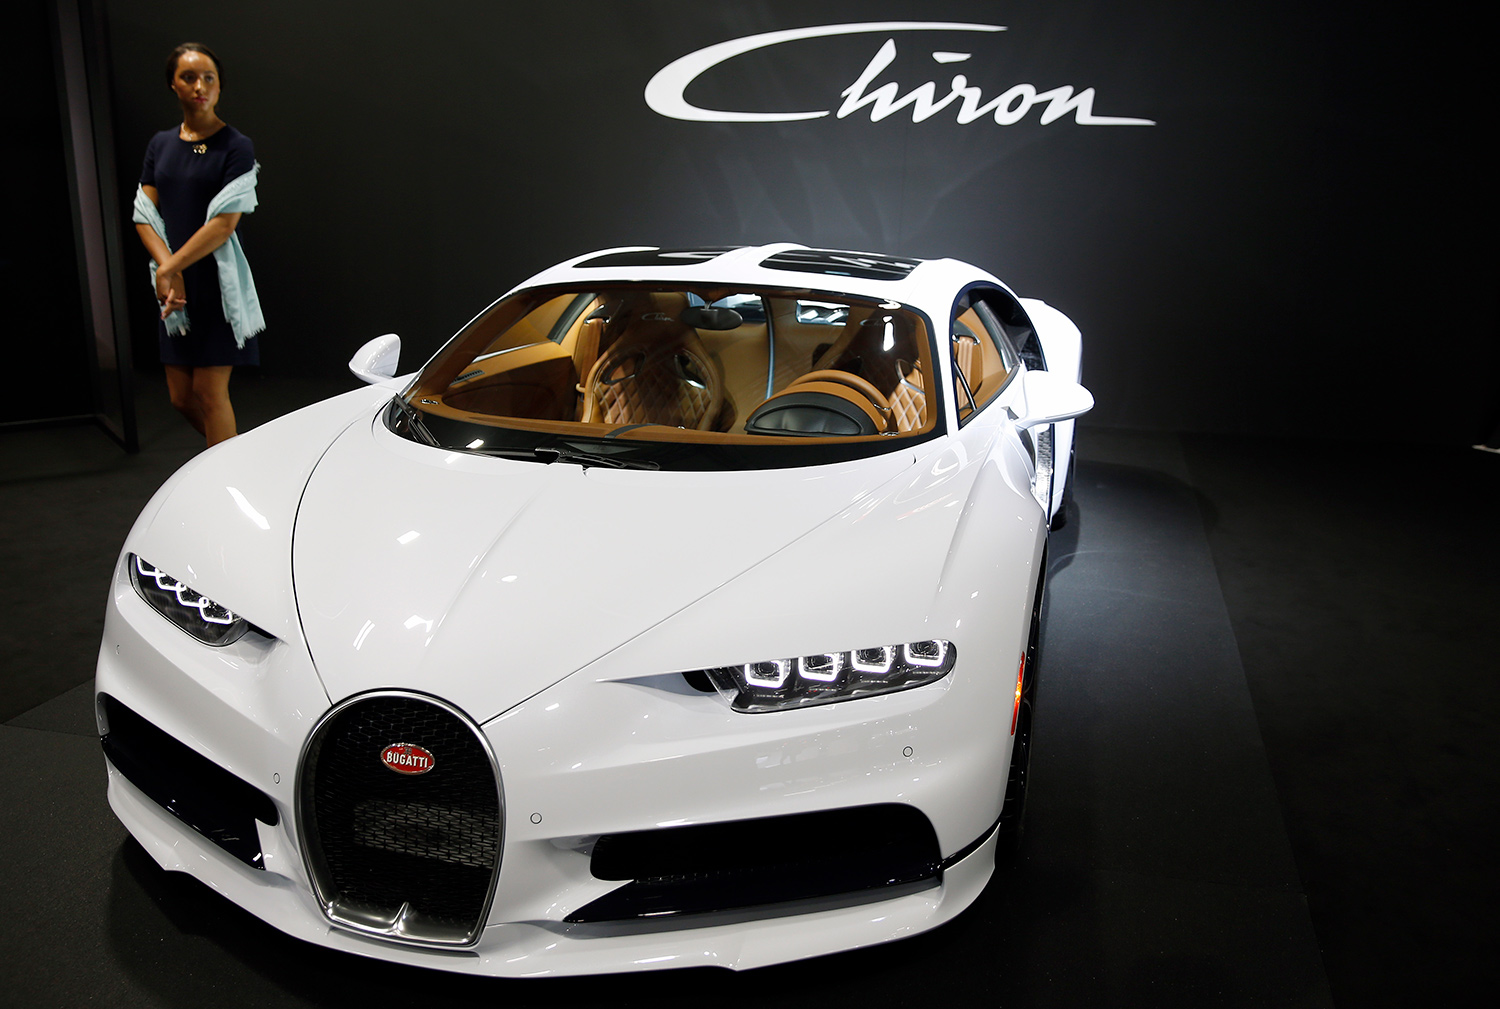 Bugatti Chiron in White on display during the second press day of the Paris Motor Show